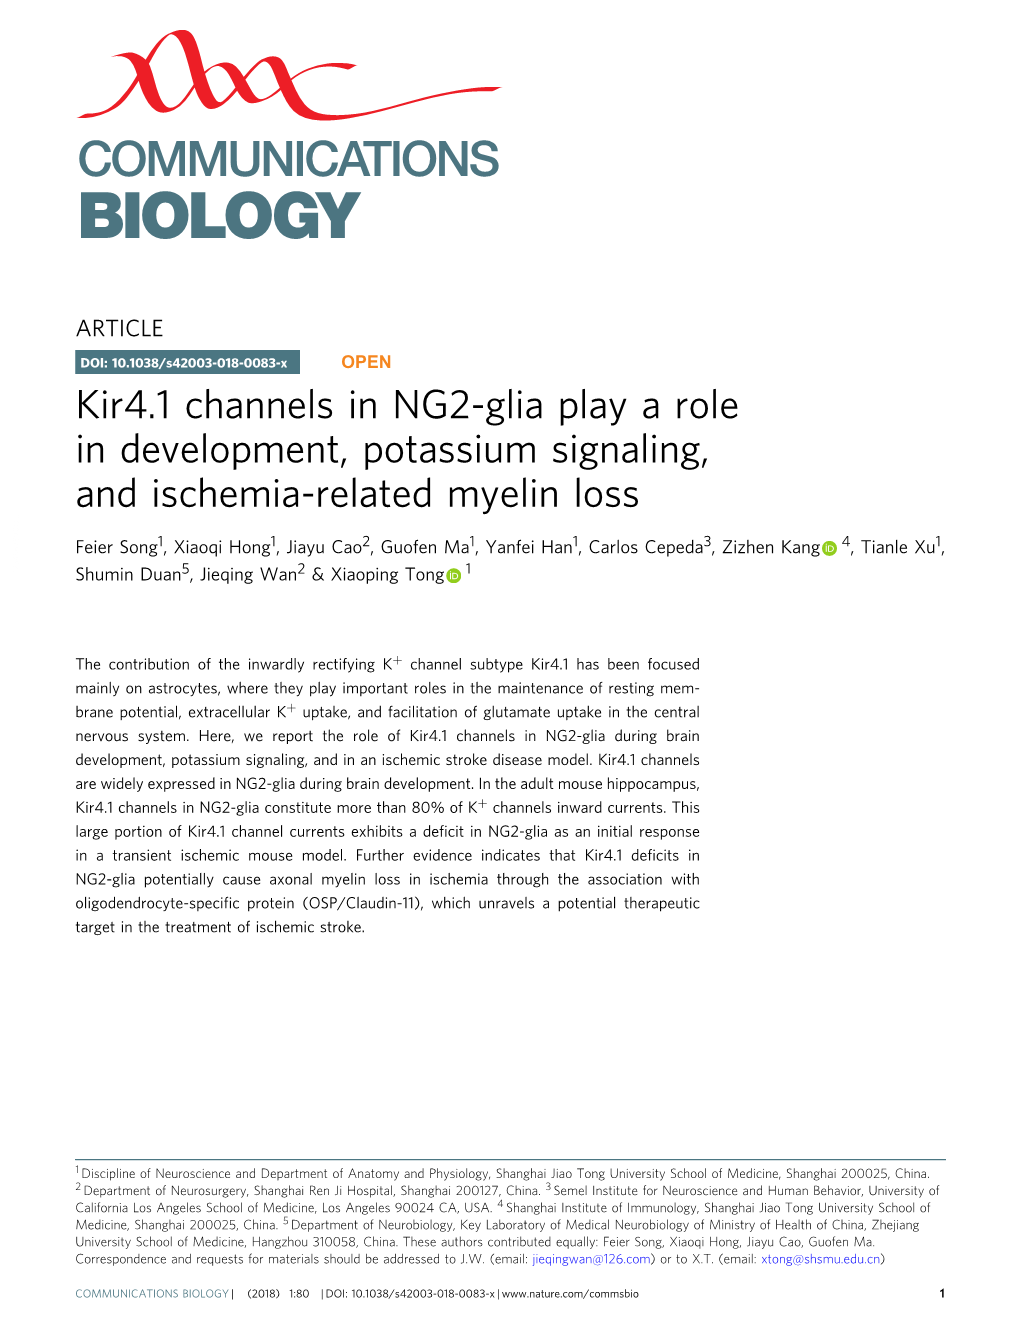 Kir4.1 Channels in NG2-Glia Play a Role in Development, Potassium Signaling, and Ischemia-Related Myelin Loss